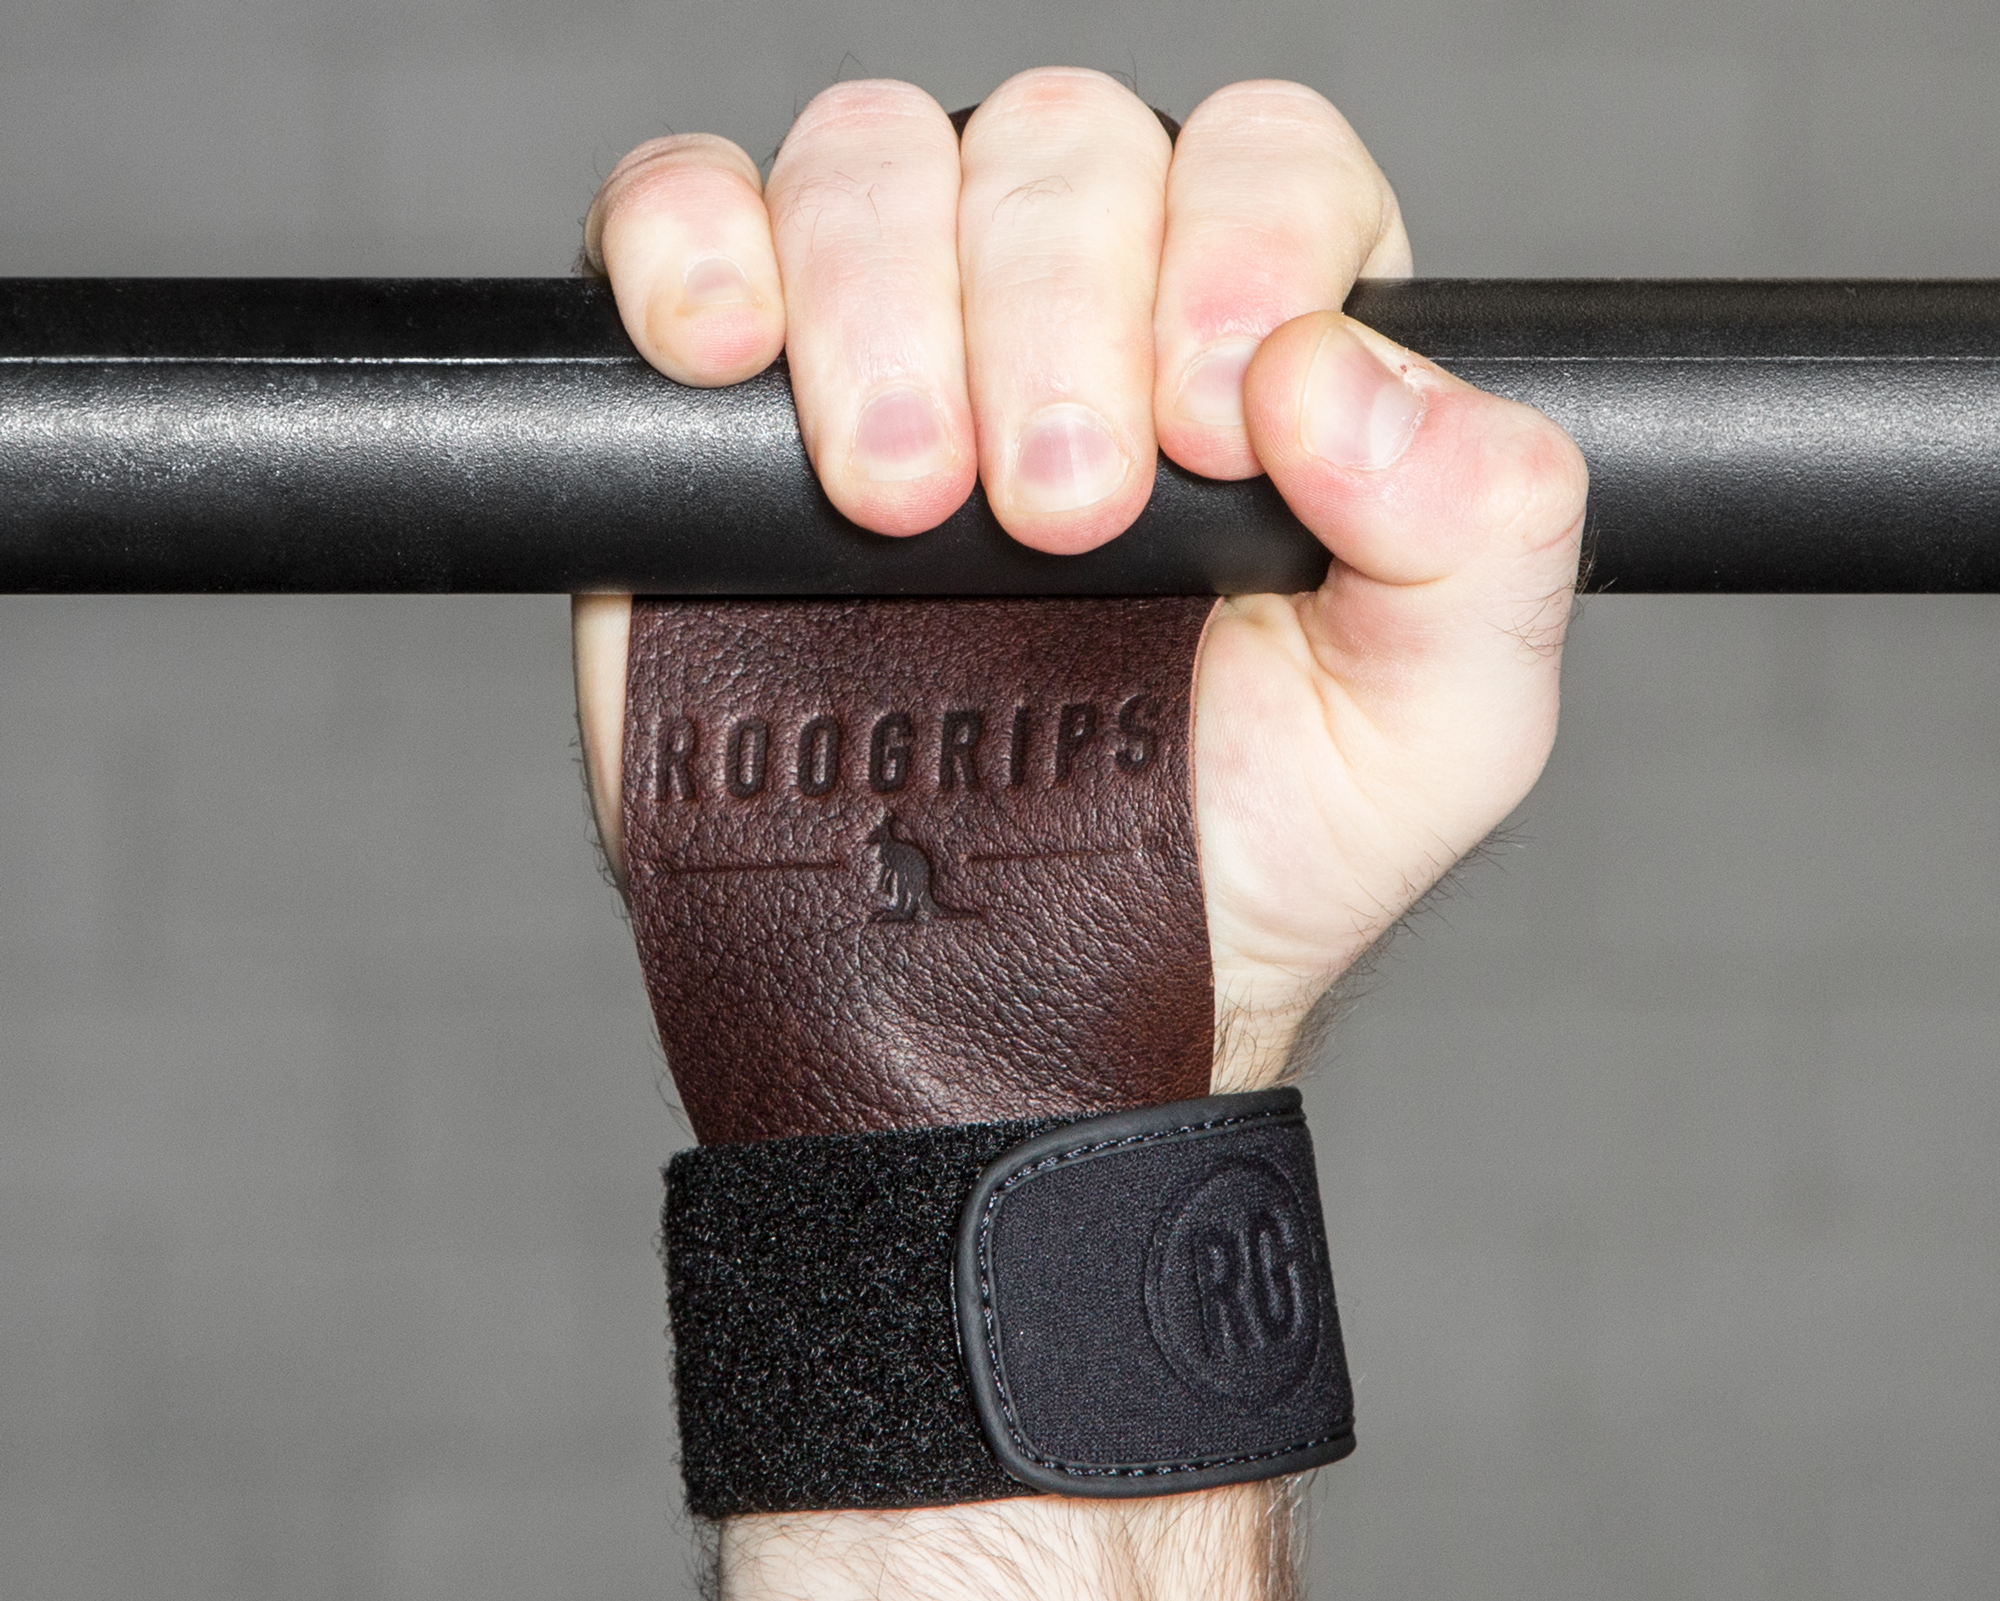 RooGrips 2 Hole Hand Grips